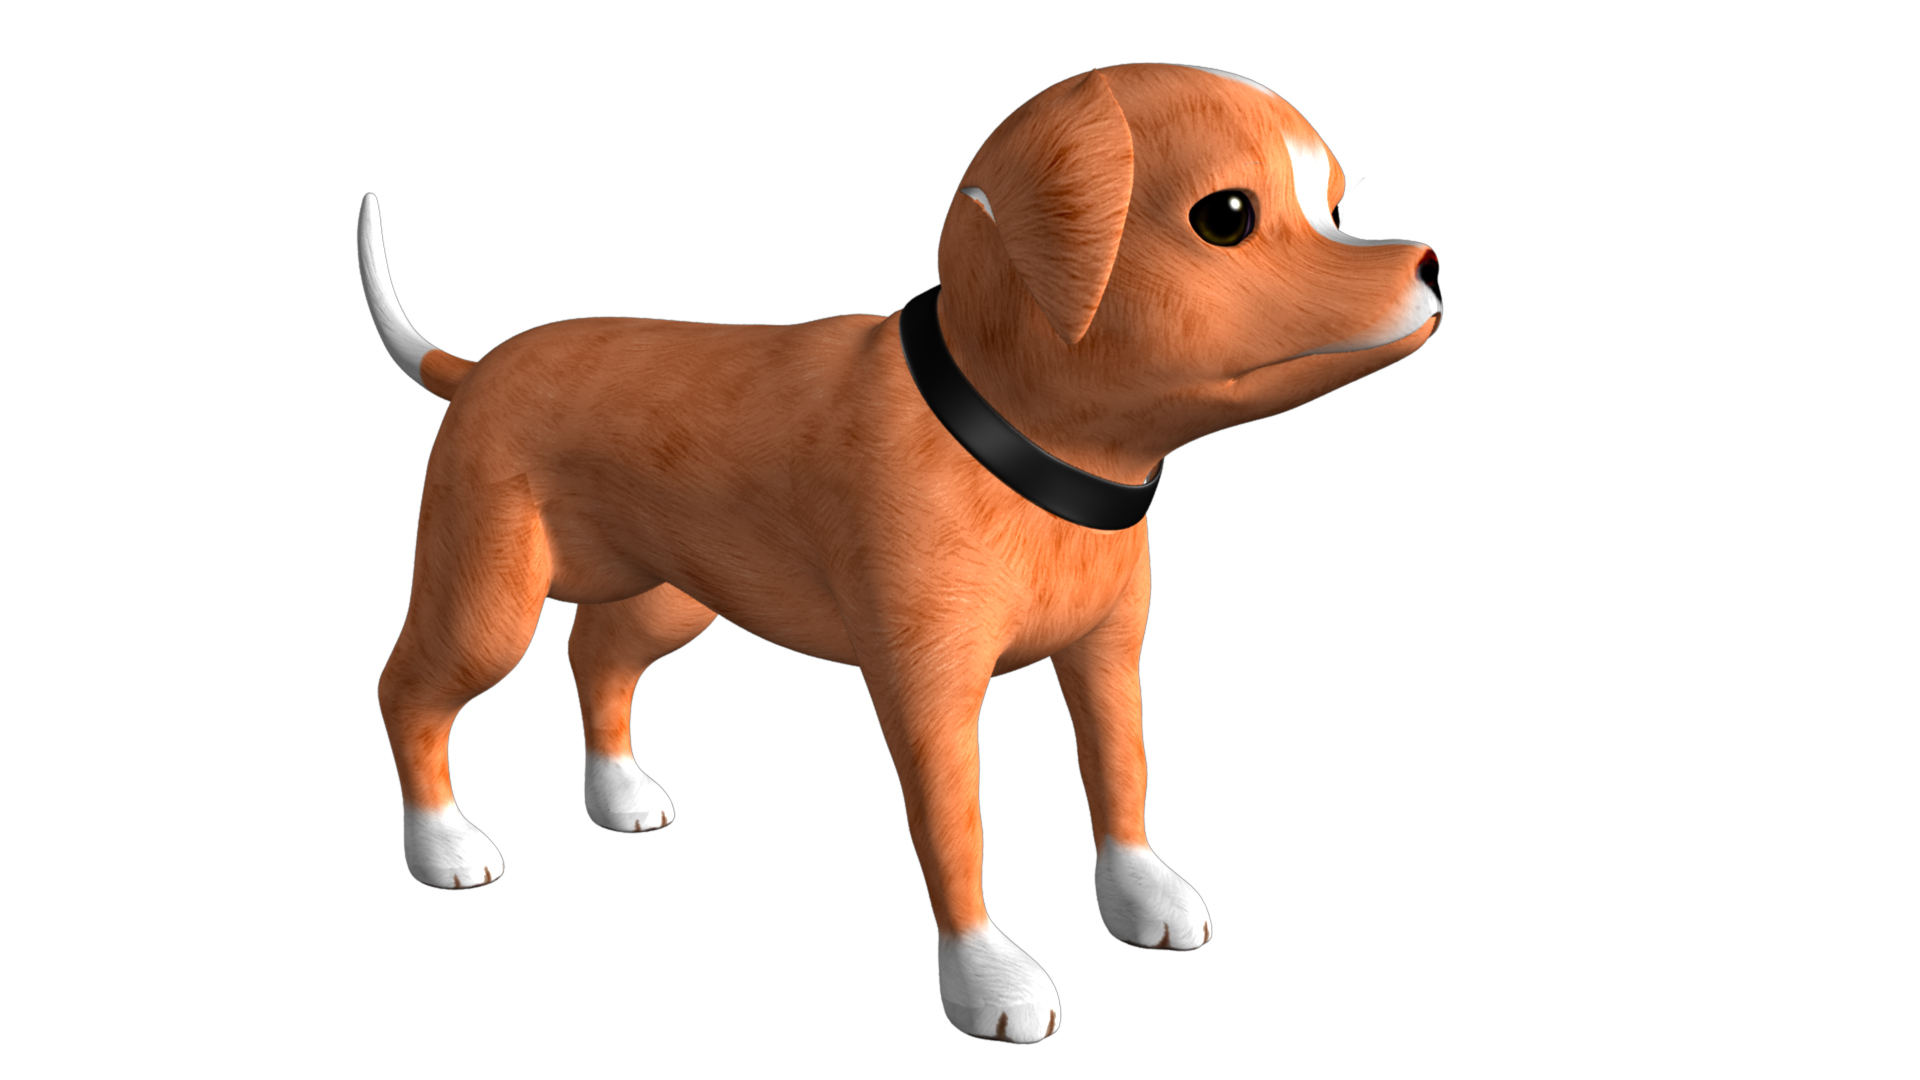 Cute Dog CHaracter RIgged and Animated by Bharticreations | 3DOcean